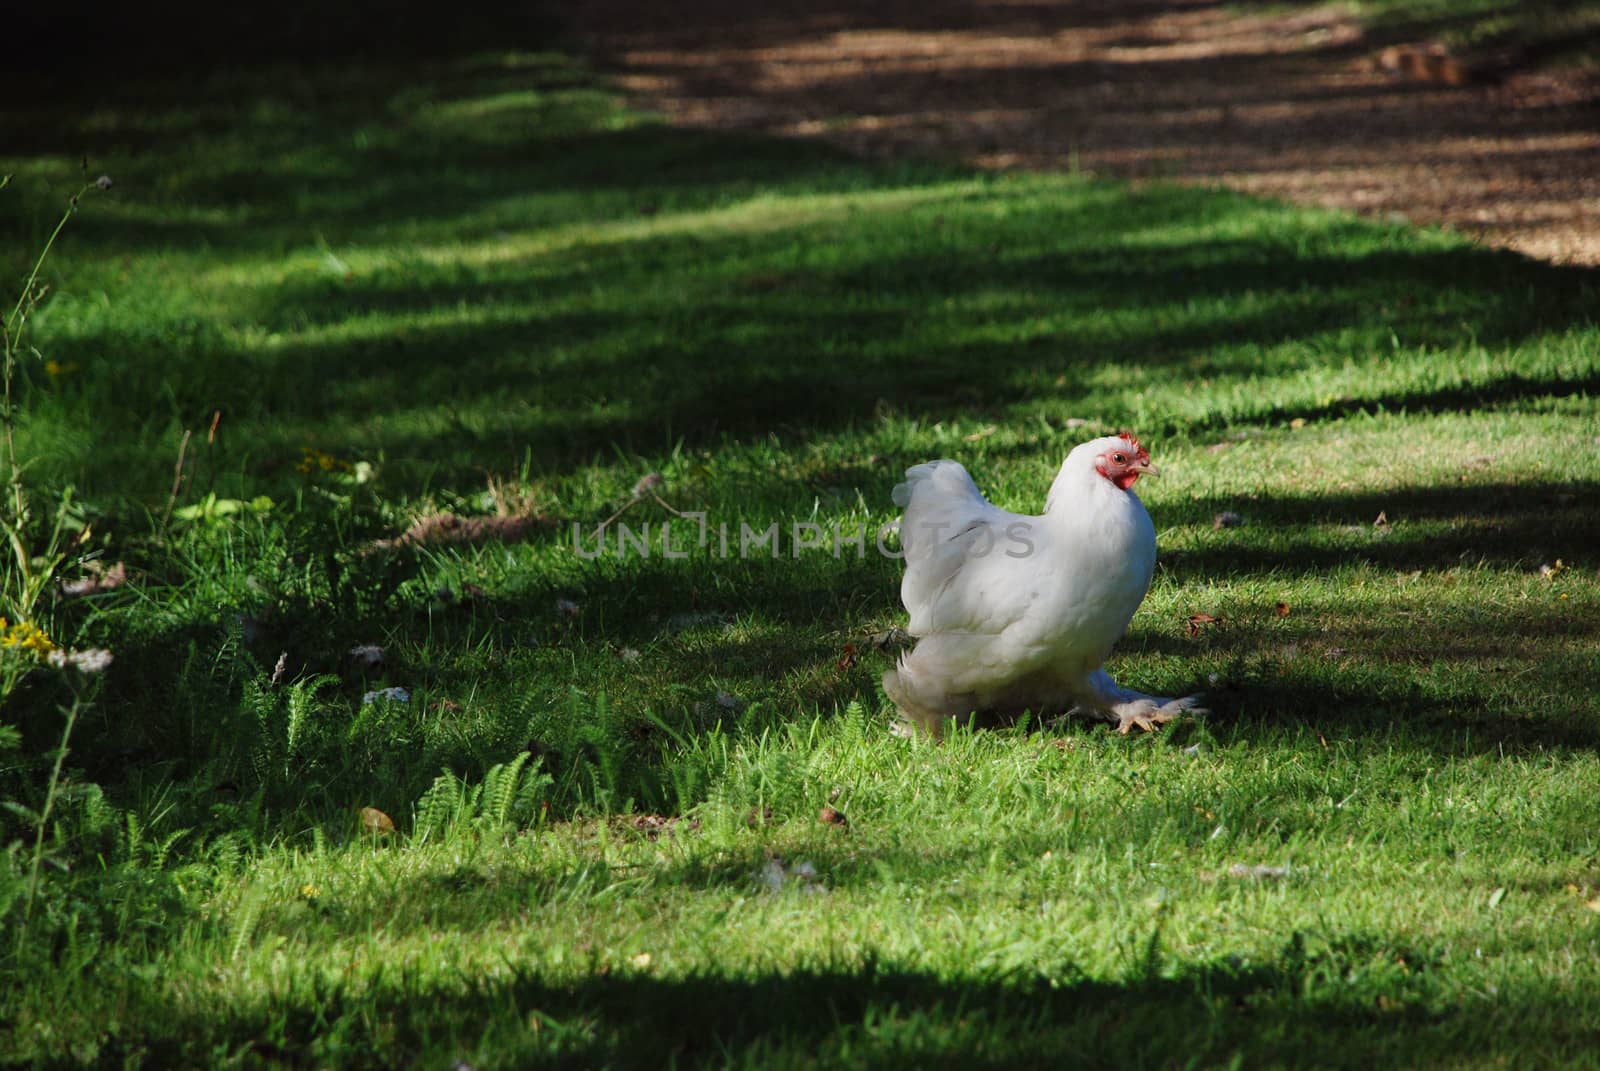 Chicken with white plumage strolls across green grass